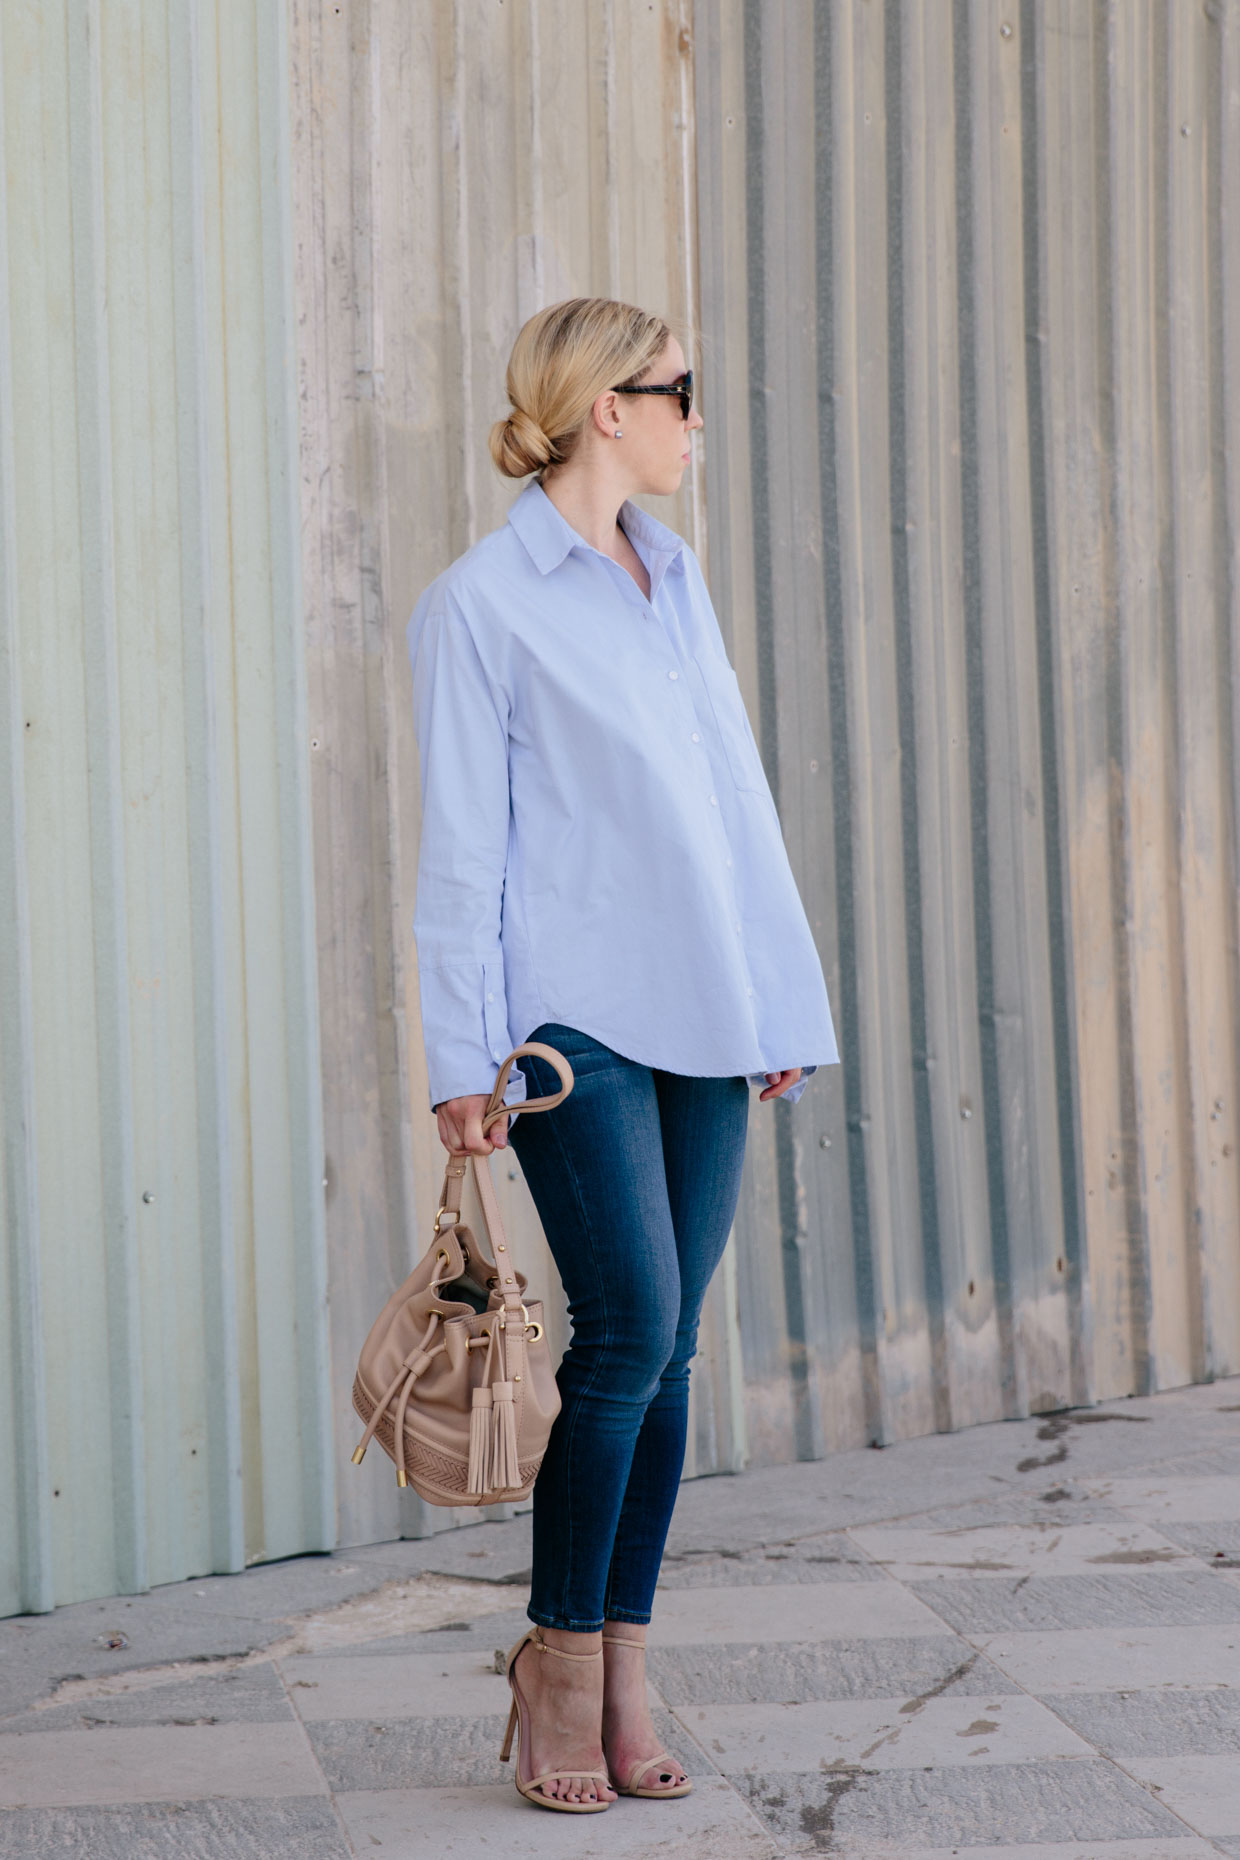 Favorite Non-Maternity Brand to Wear During Pregnancy